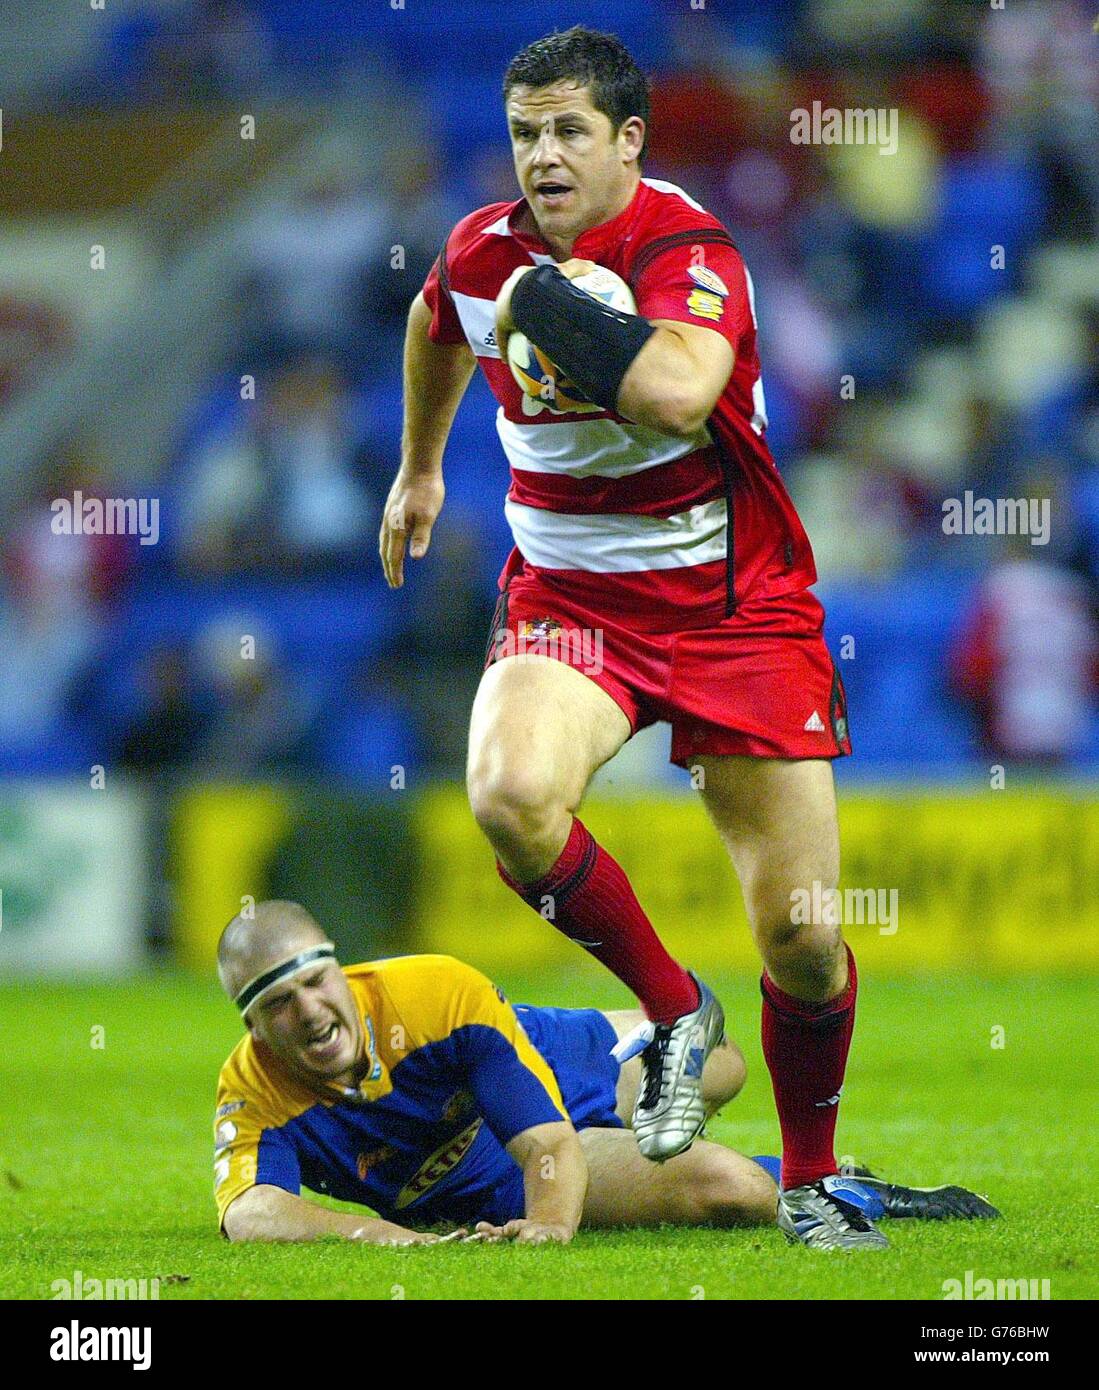 Wigan Warriors Andrew Farrell breaks after a missed tackle by Leeds Rhinos Matt Diskin, during the Tetleys Super League Semi-Final at the JJB Stadium in Wigan. Stock Photo